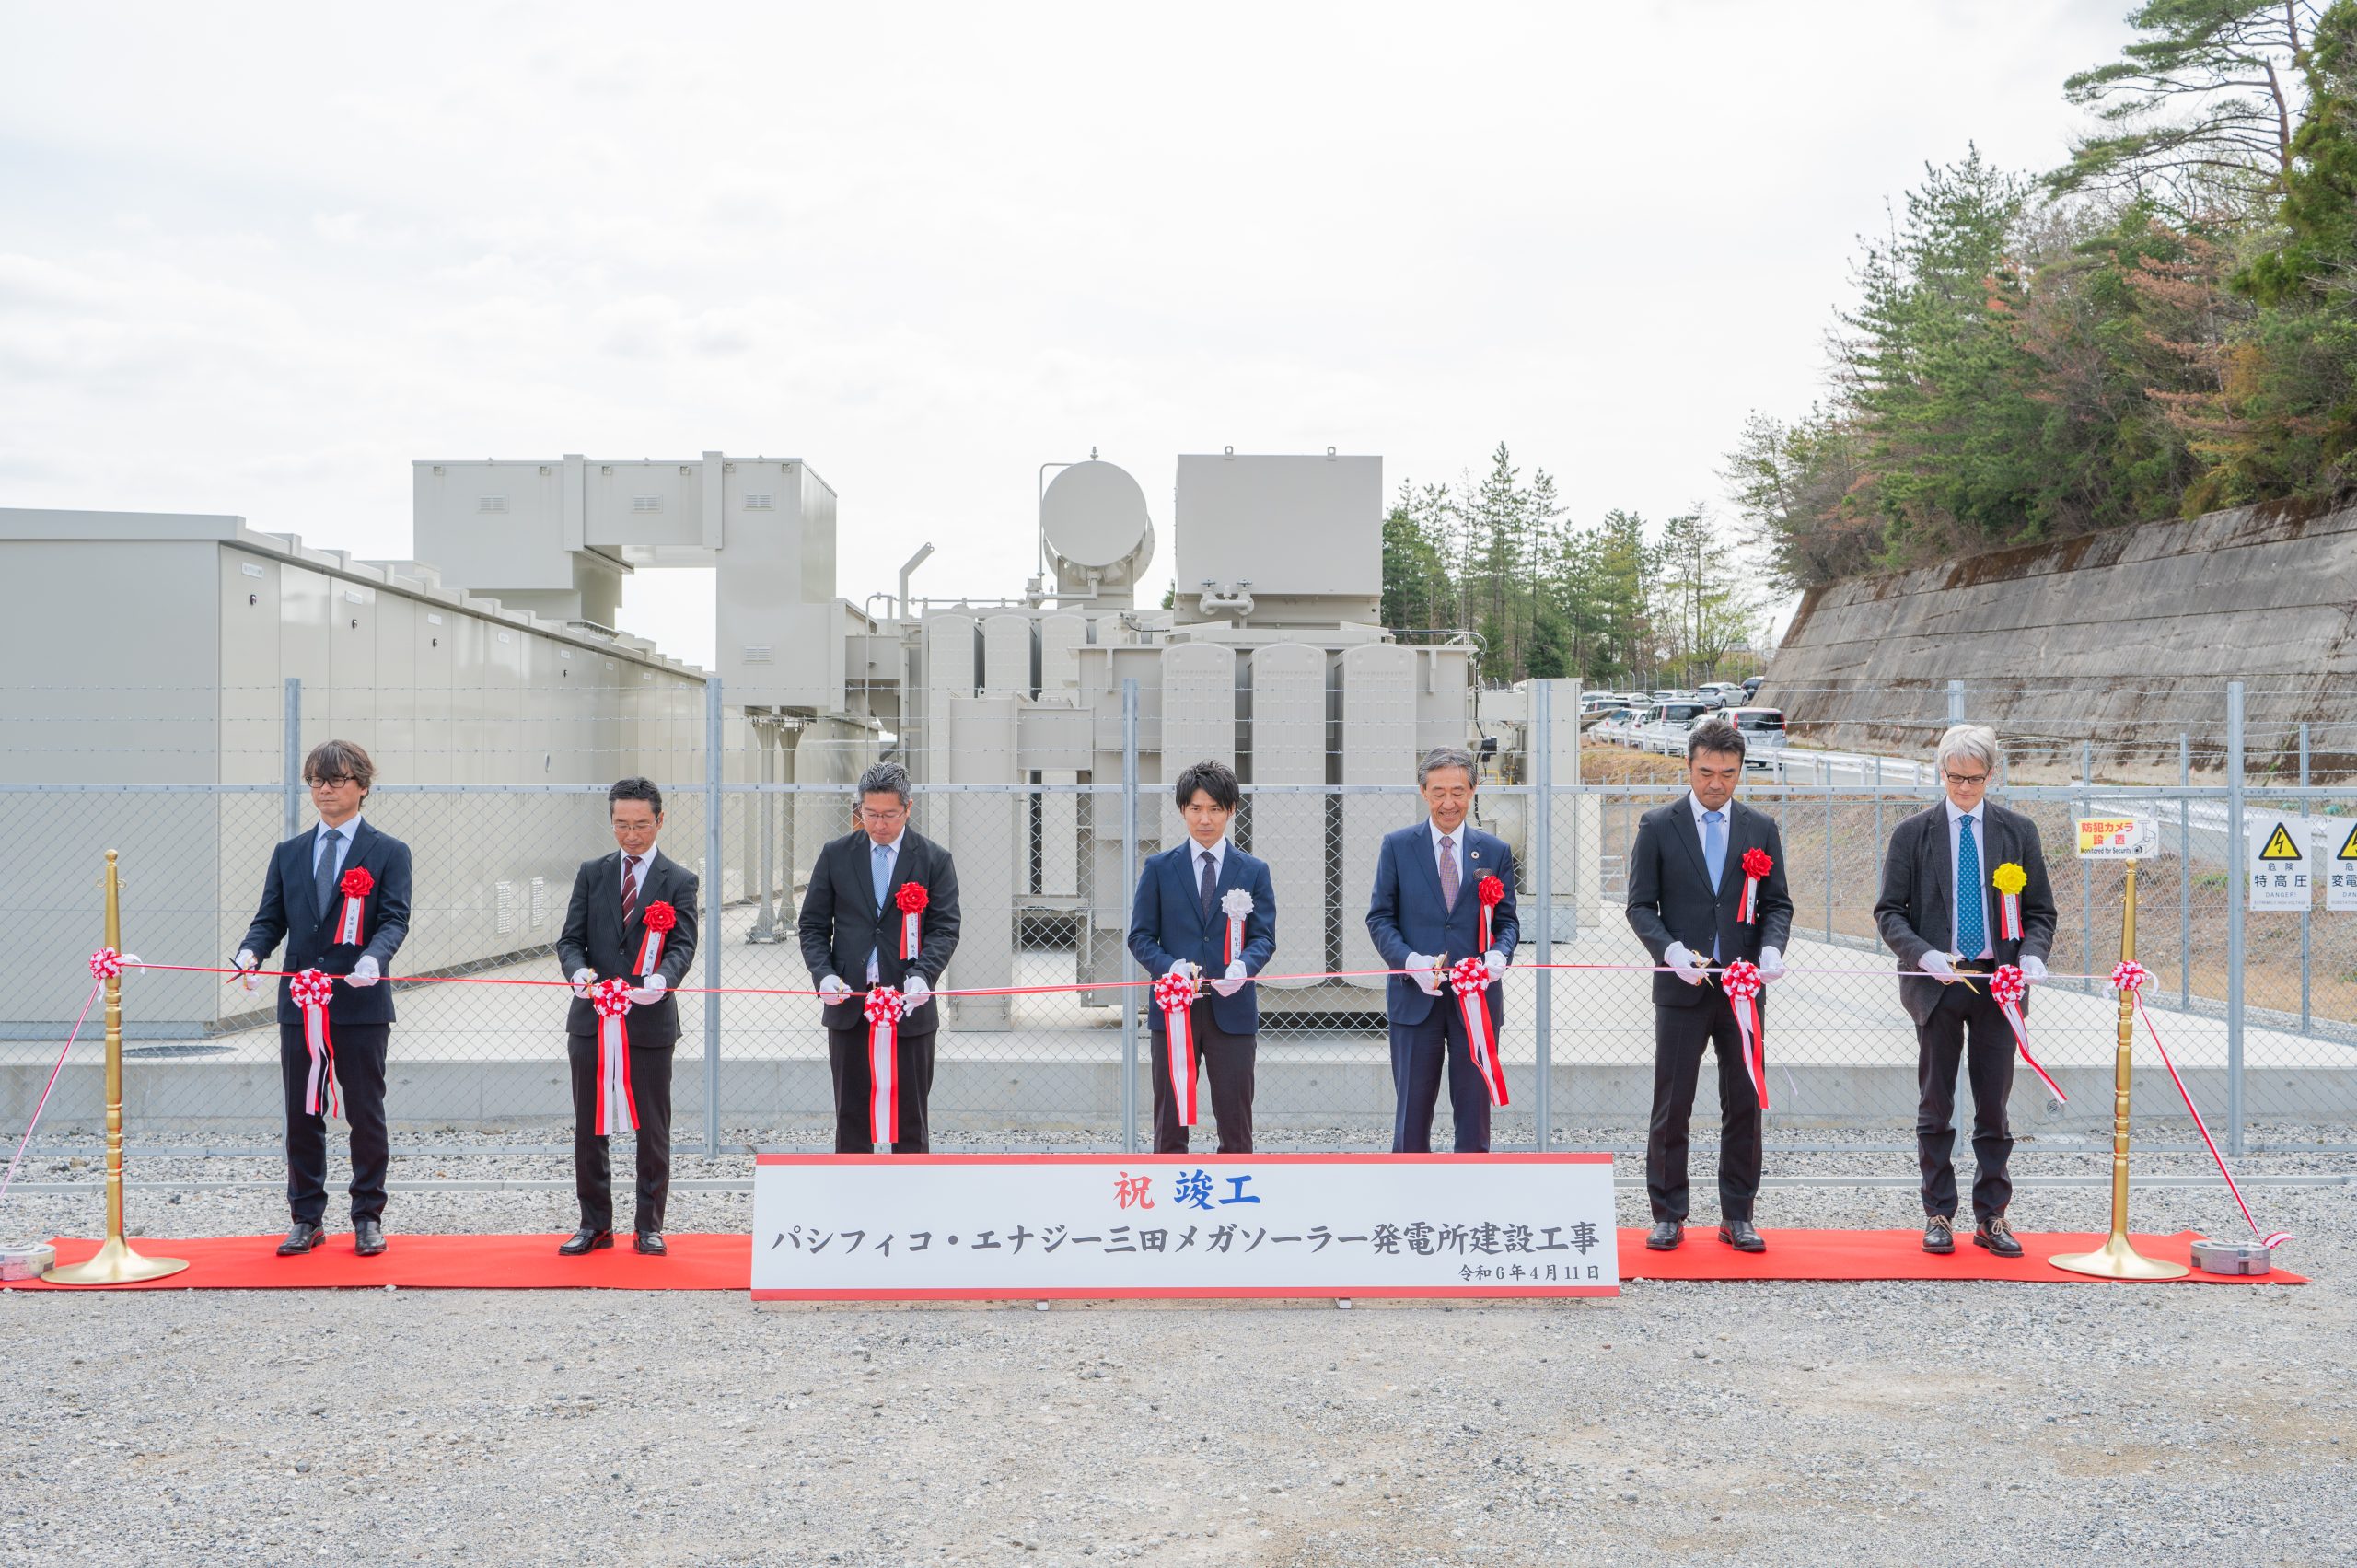 juwi Shizen Energy completes construction of 121MW solar power plant in Hyogo, one of the largest in the Kansai region